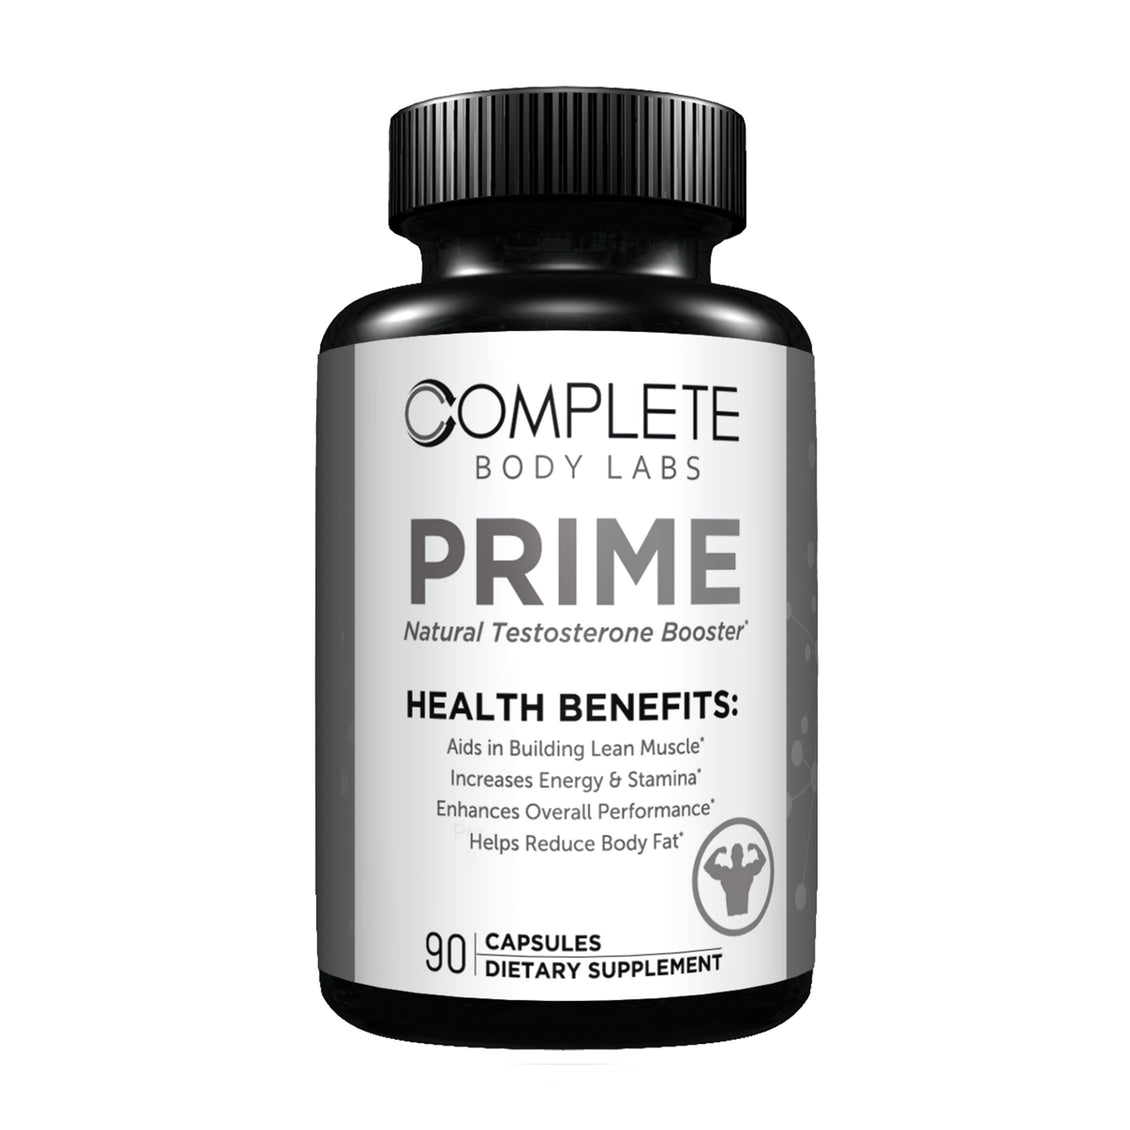 Buy Prime Natural Testosterone Booster For Men Online Complete Body Labs 4503